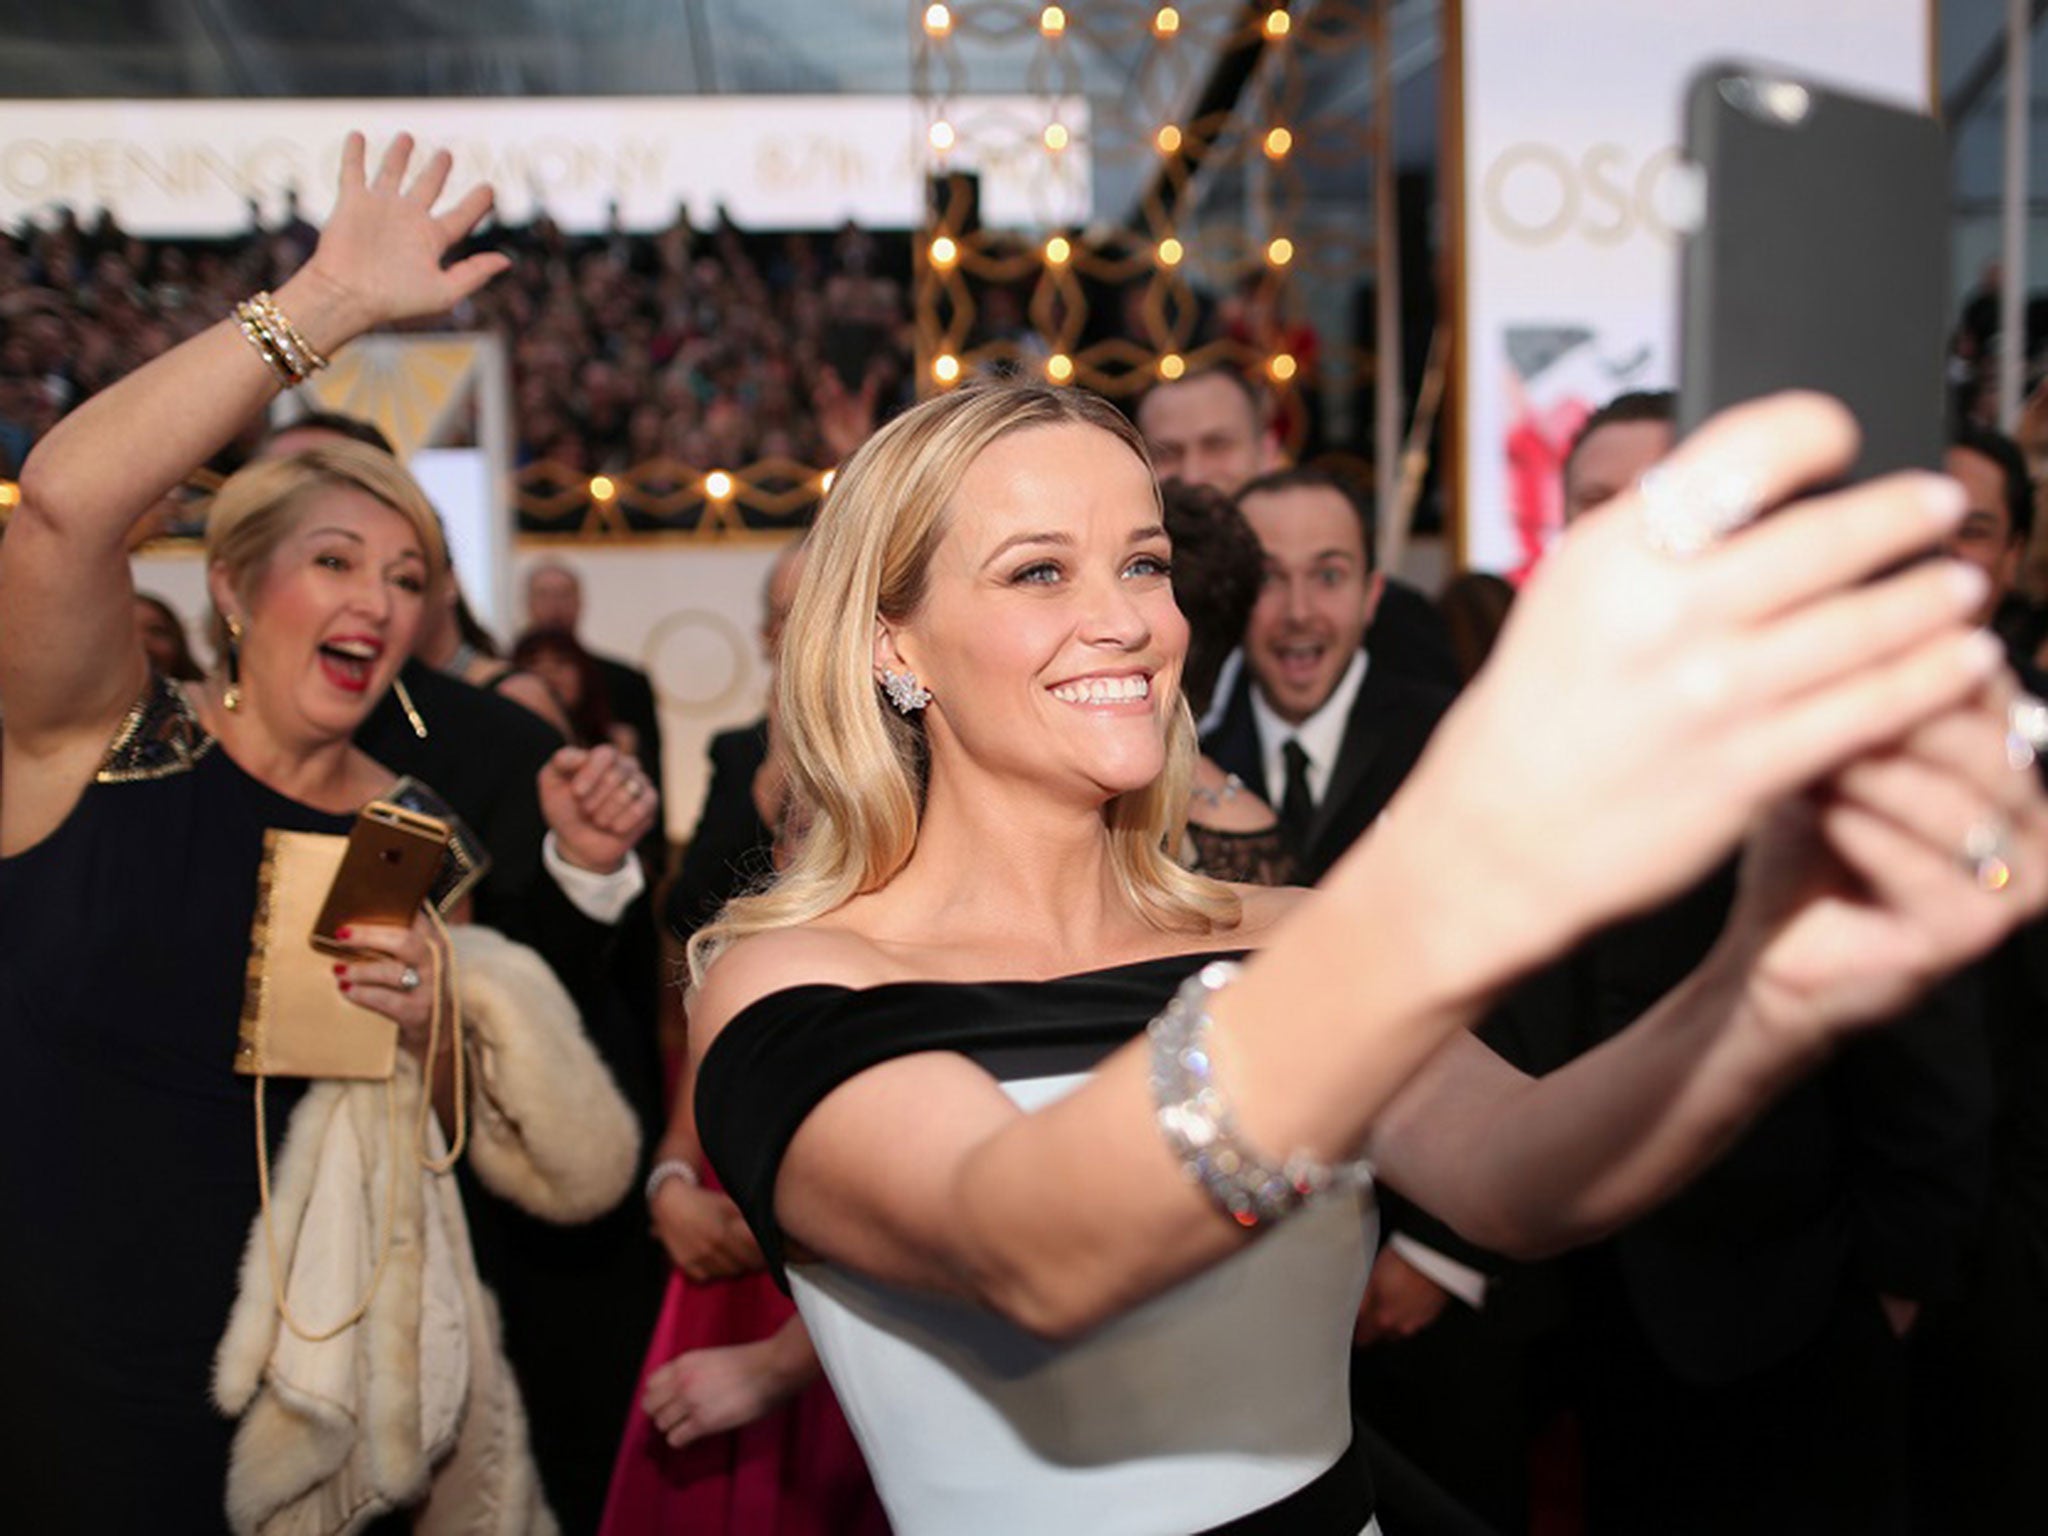 Best Actress nominee Reese Witherspoon taking a selfie on the red carpet